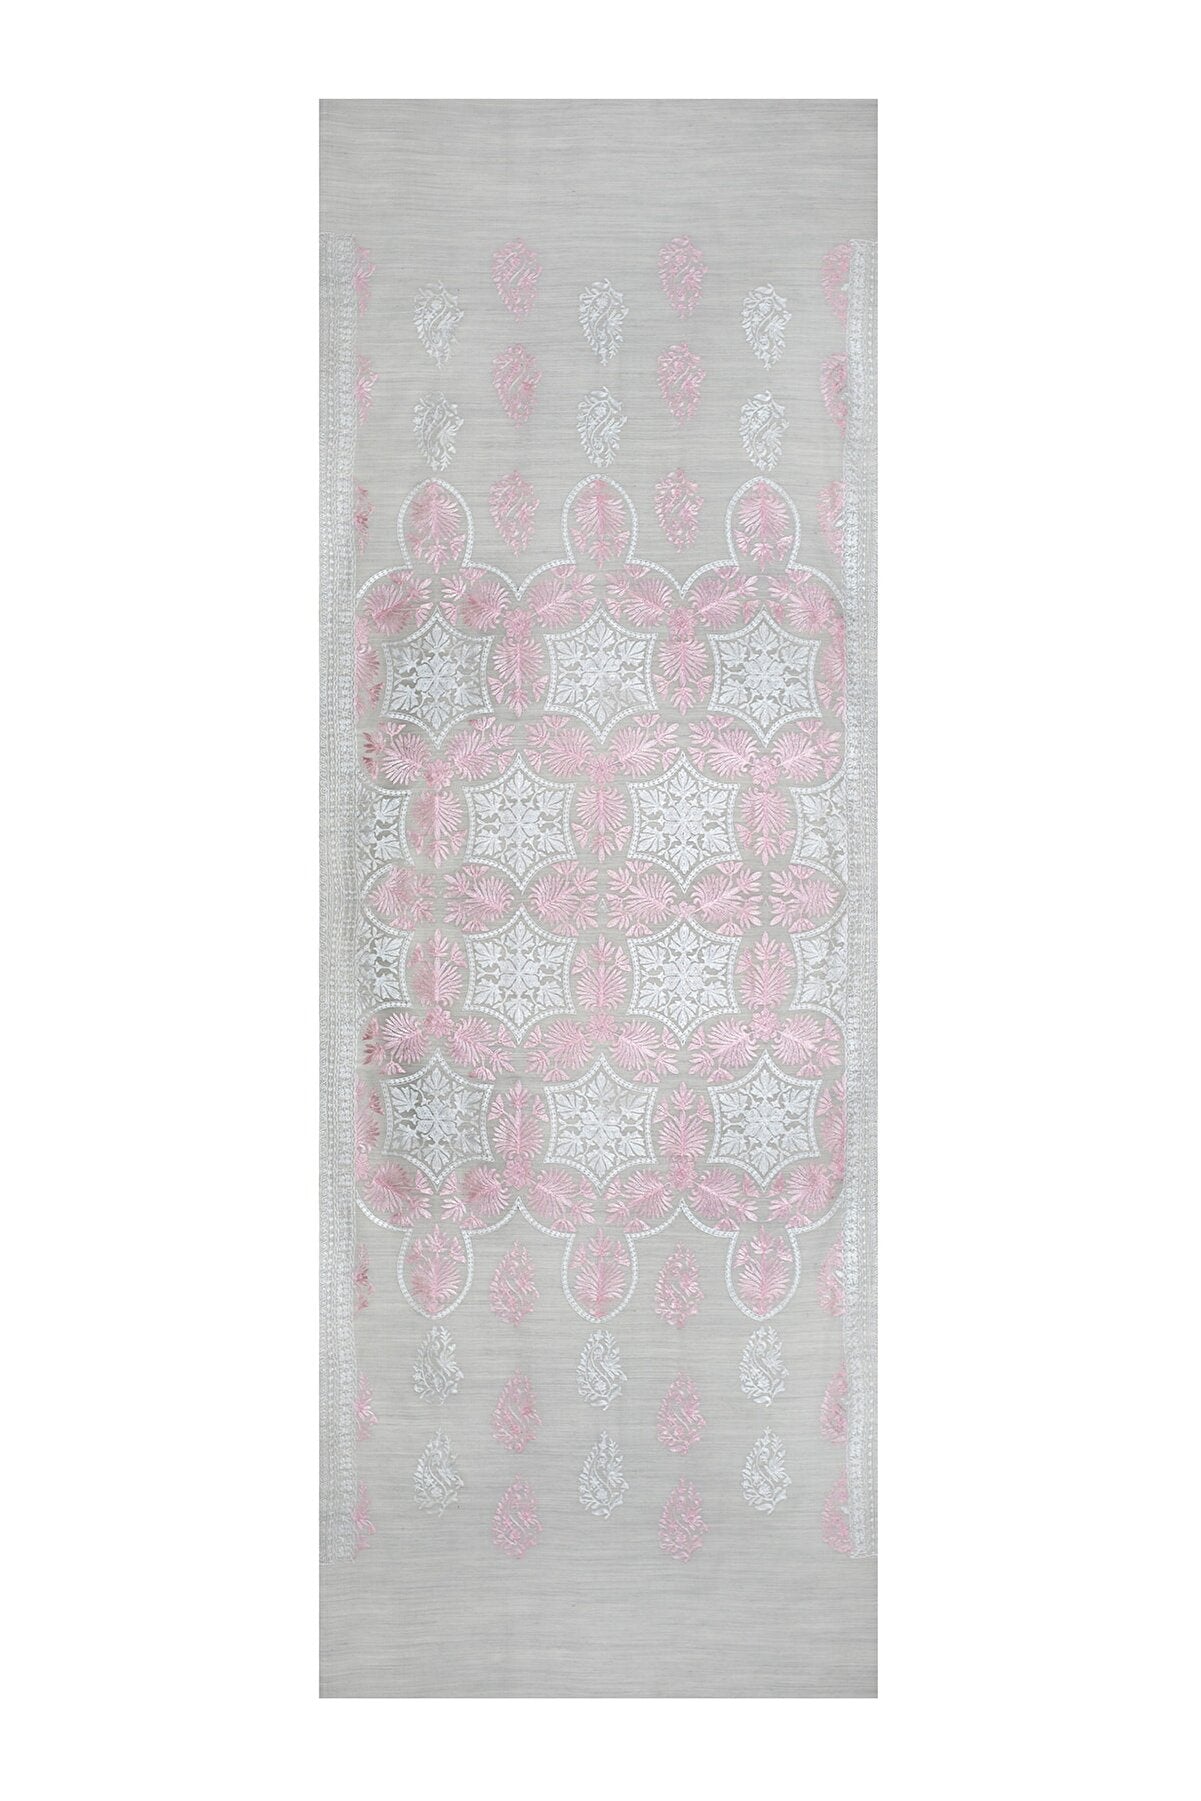 Traditional Embroidery Flower of Life Paisley - White Pink